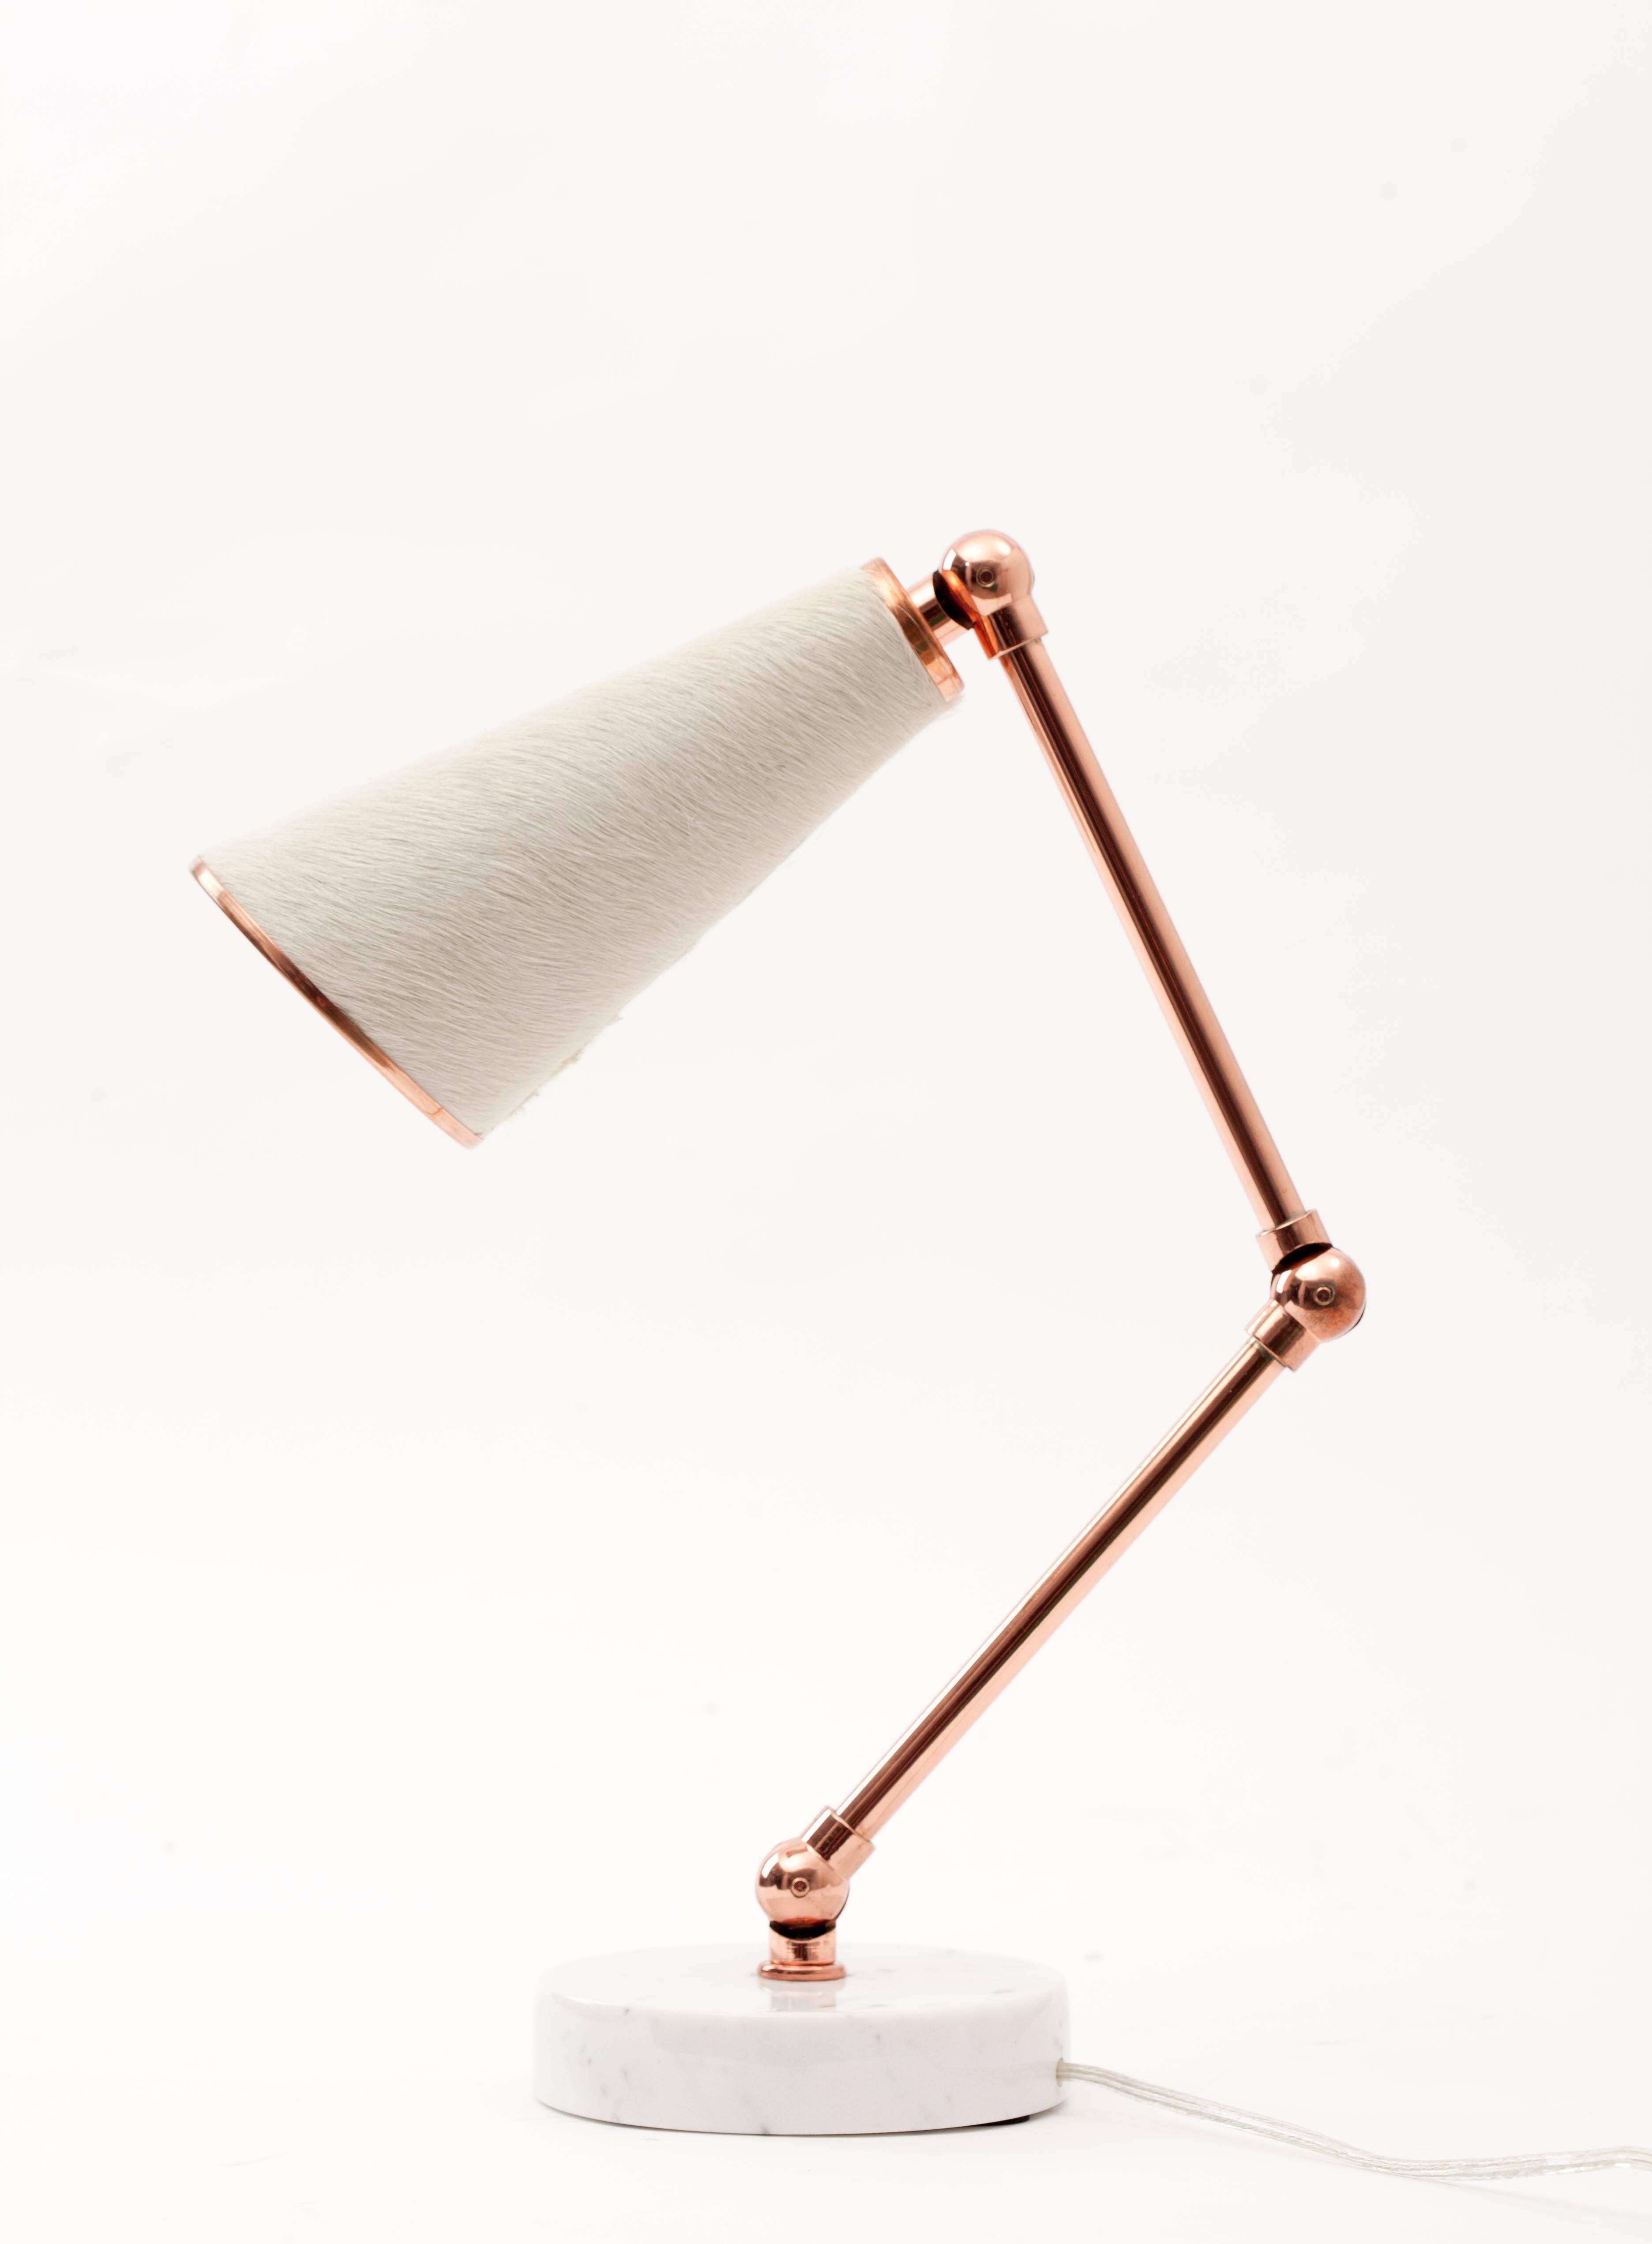 Lanterna Table Lamp in Carrara Marble, Cork and Copper with Adjustable Arms  For Sale 7